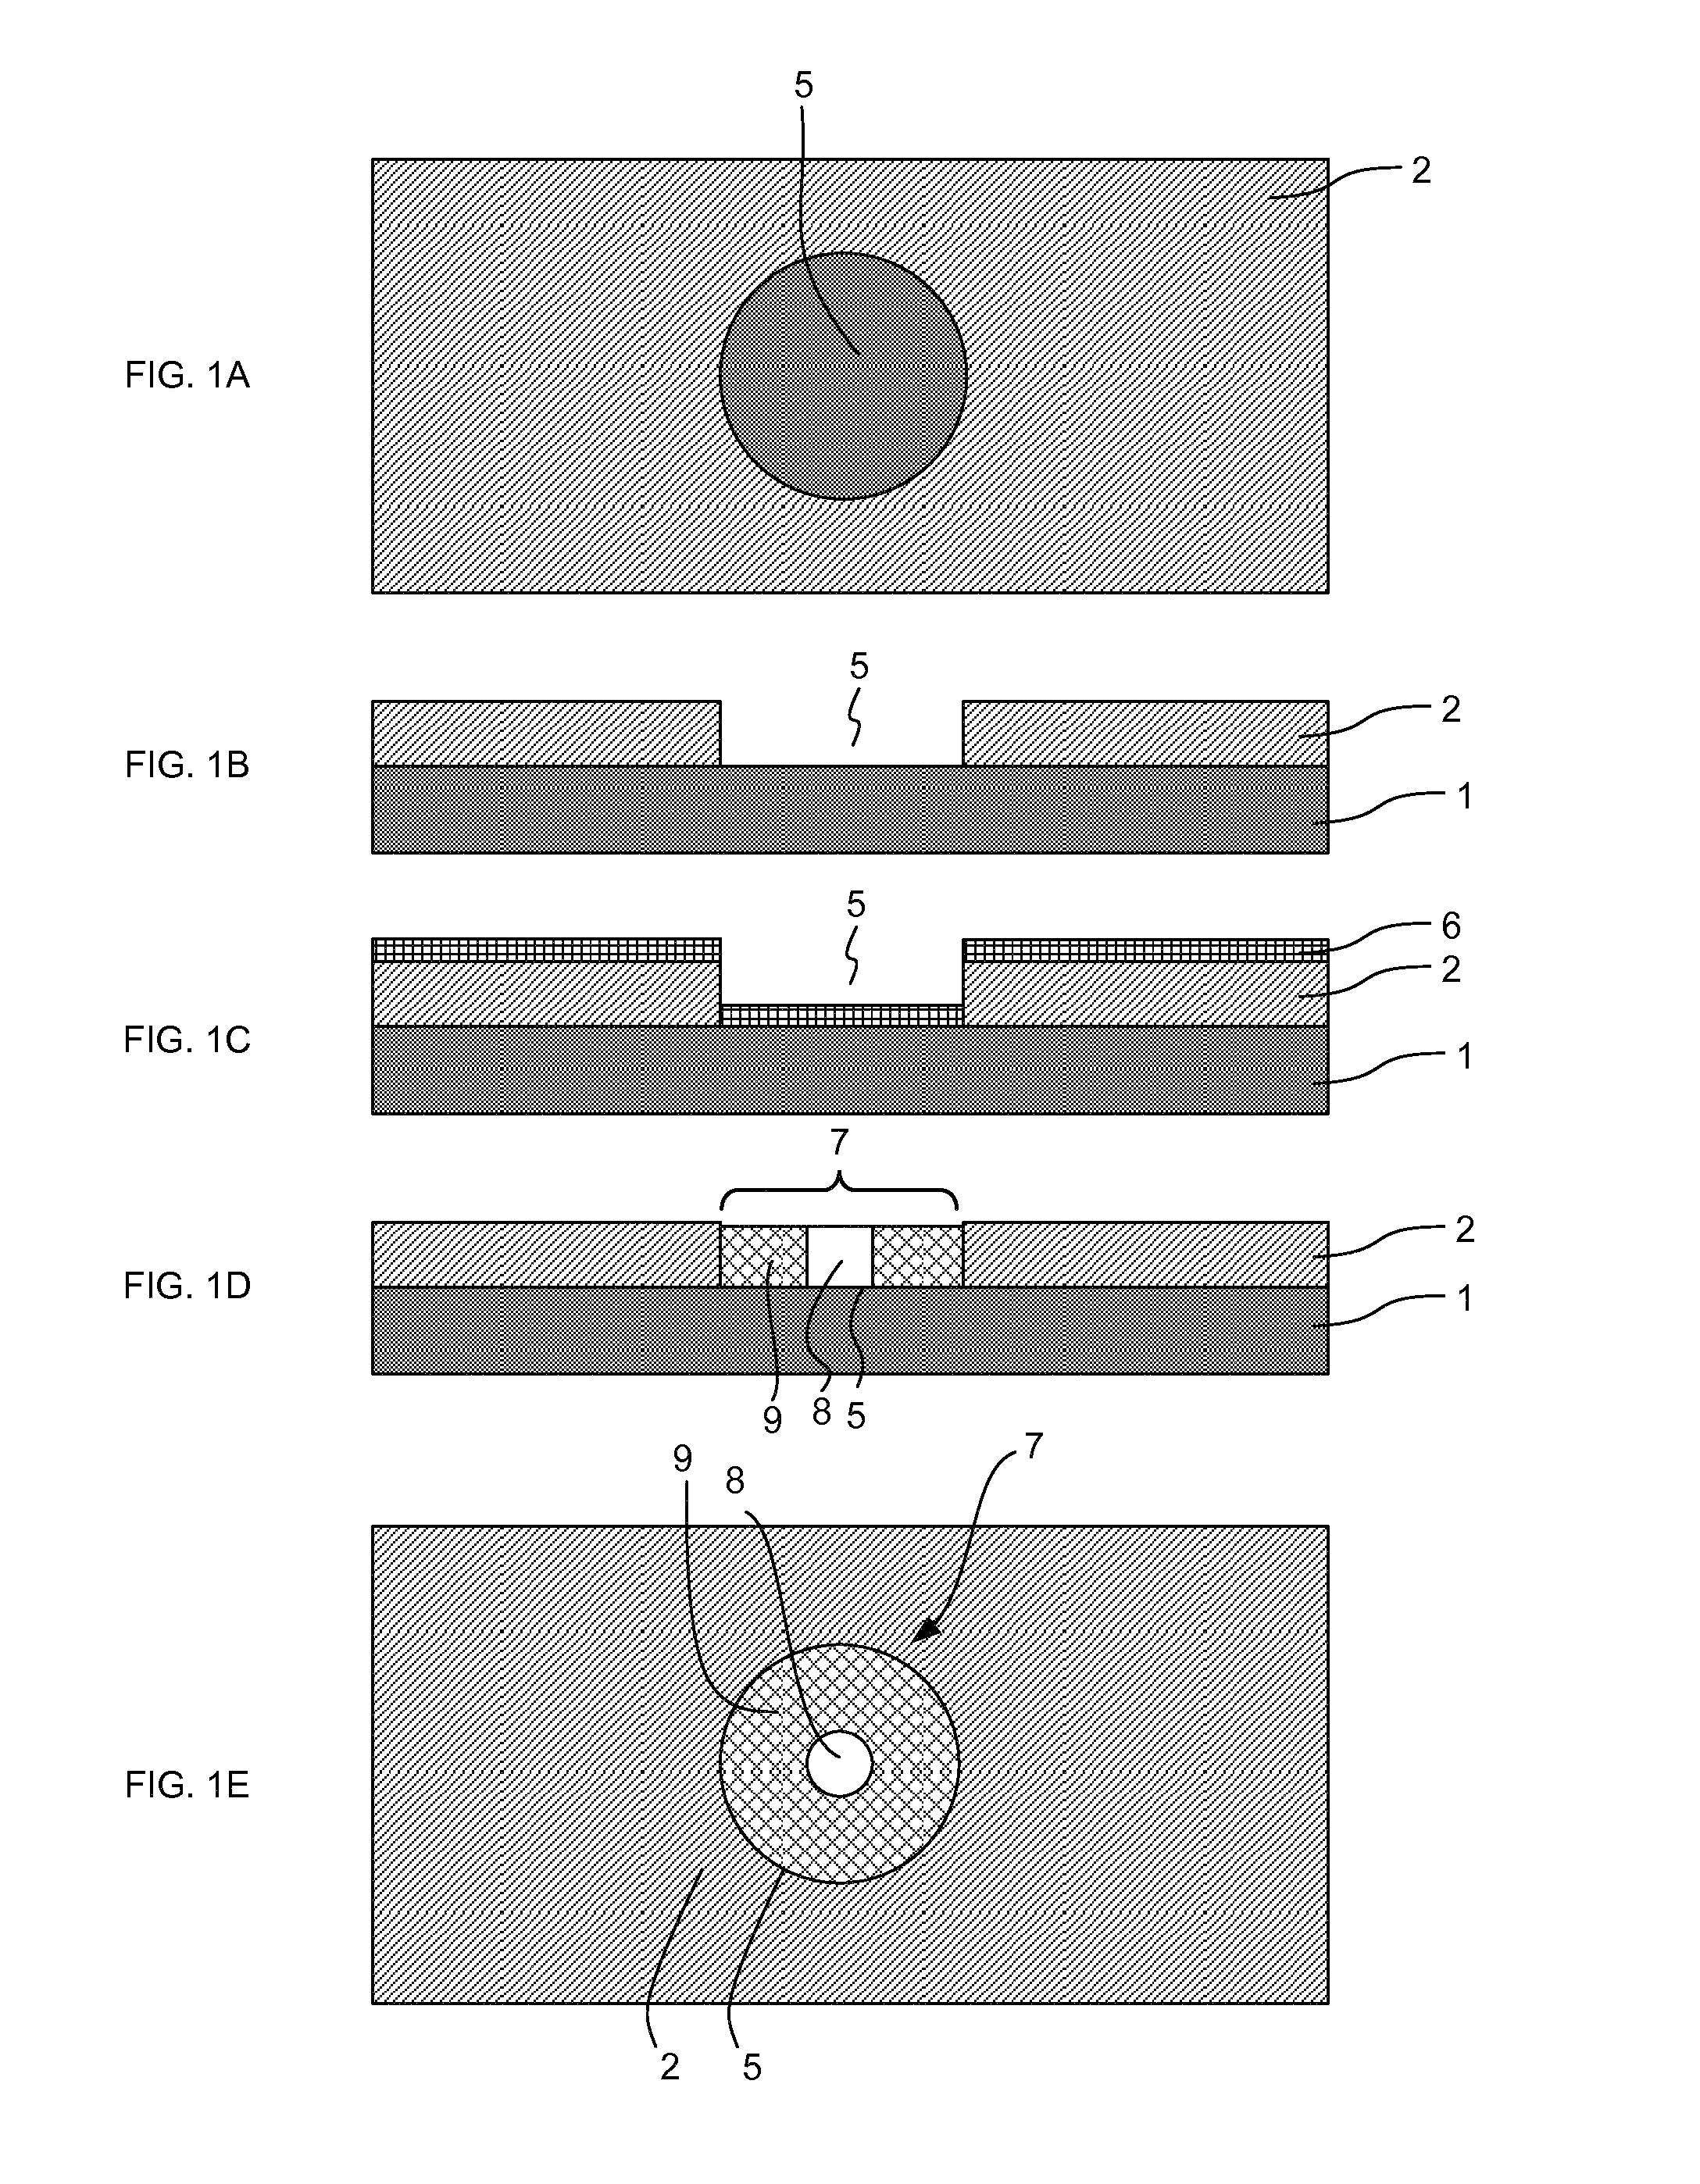 Method of simulating formation of lithography features by self-assembly of block copolymers